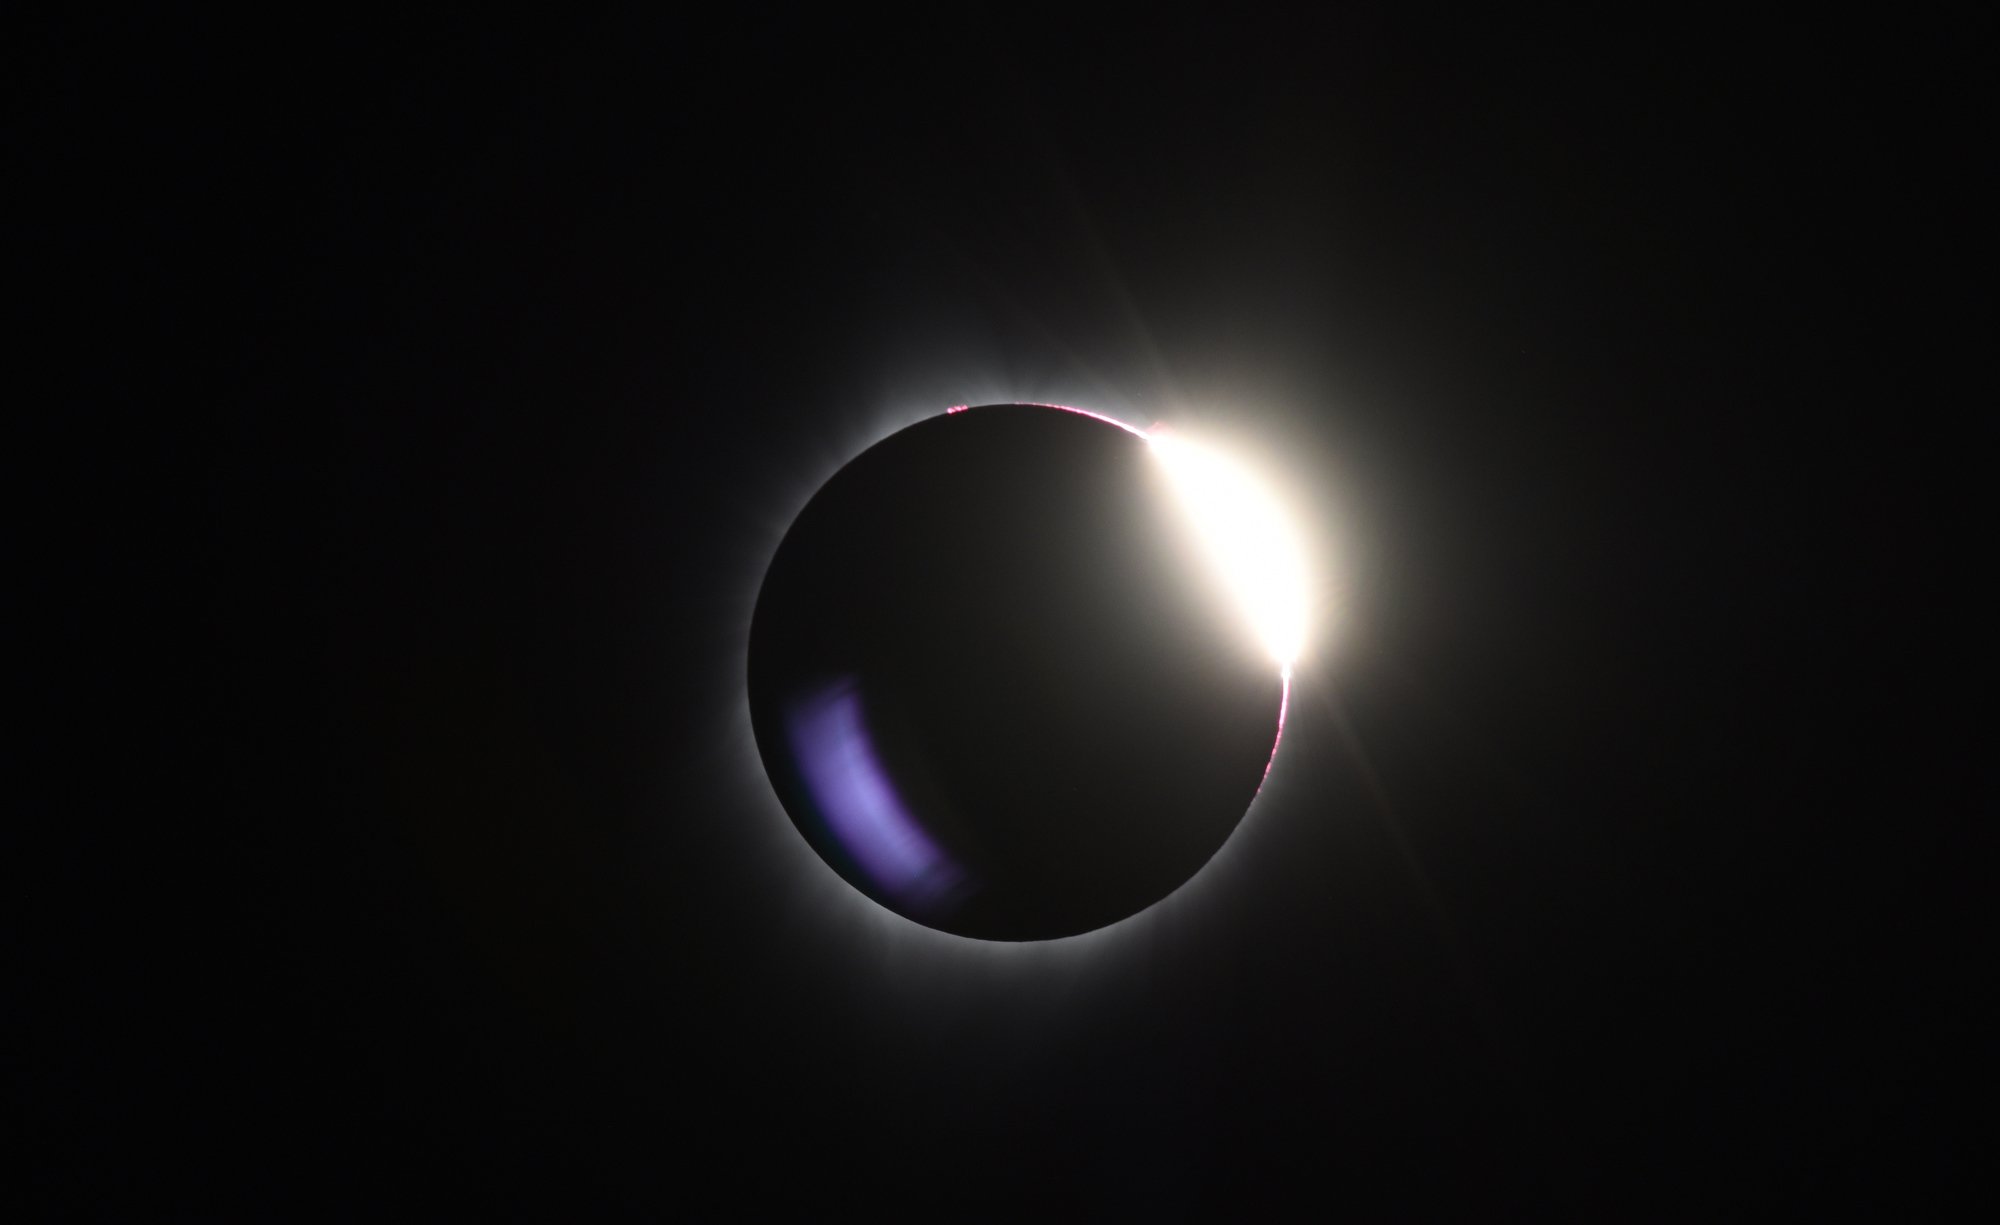 Moon passing over sun during total solar eclipse